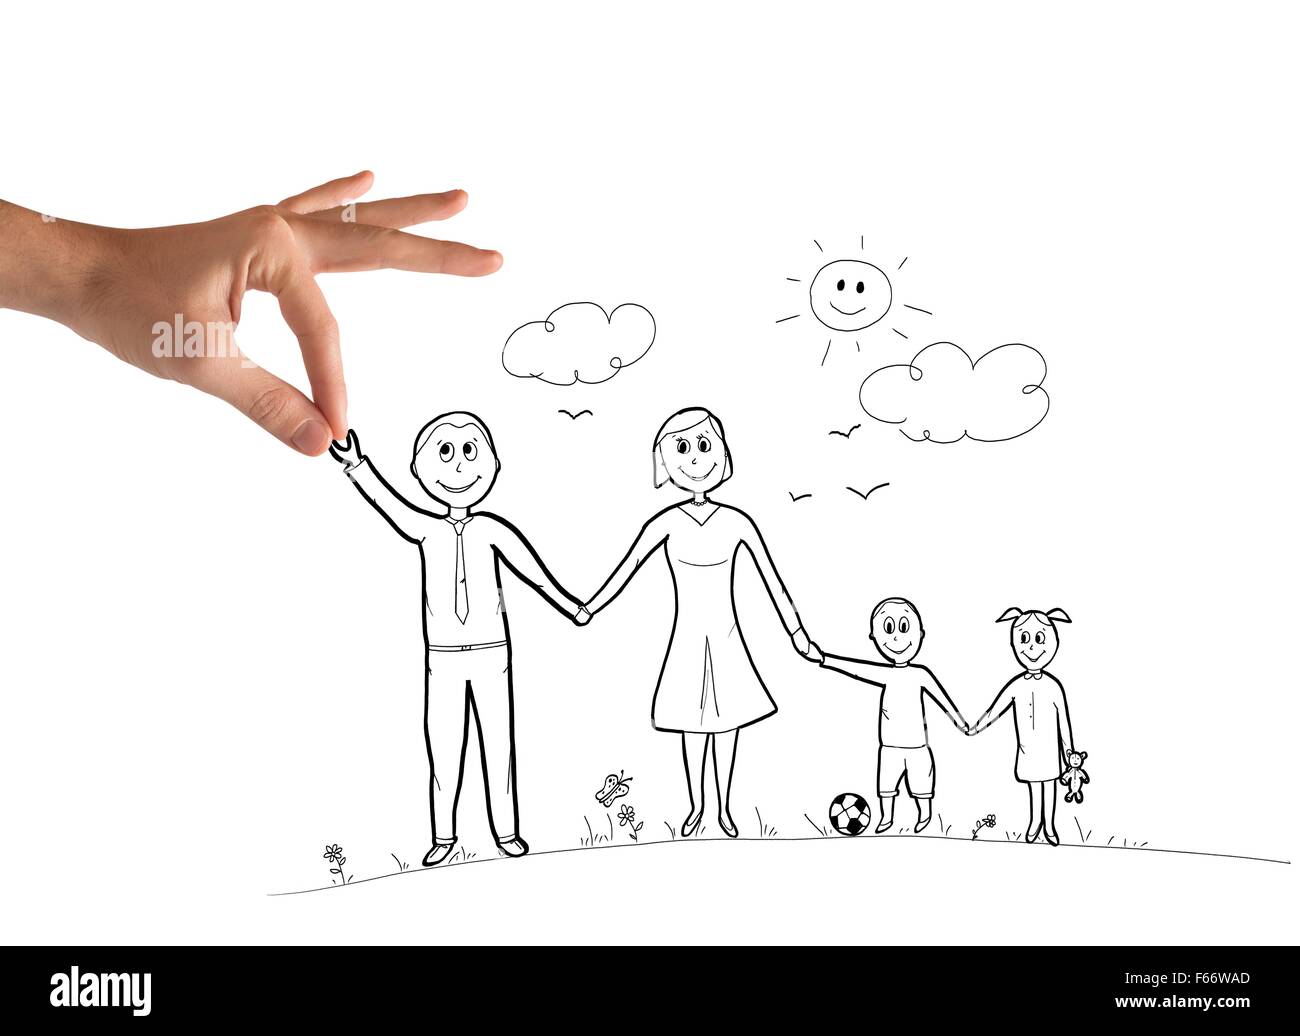 25 Easy Family Drawing Ideas  Cute Family Sketch and Art